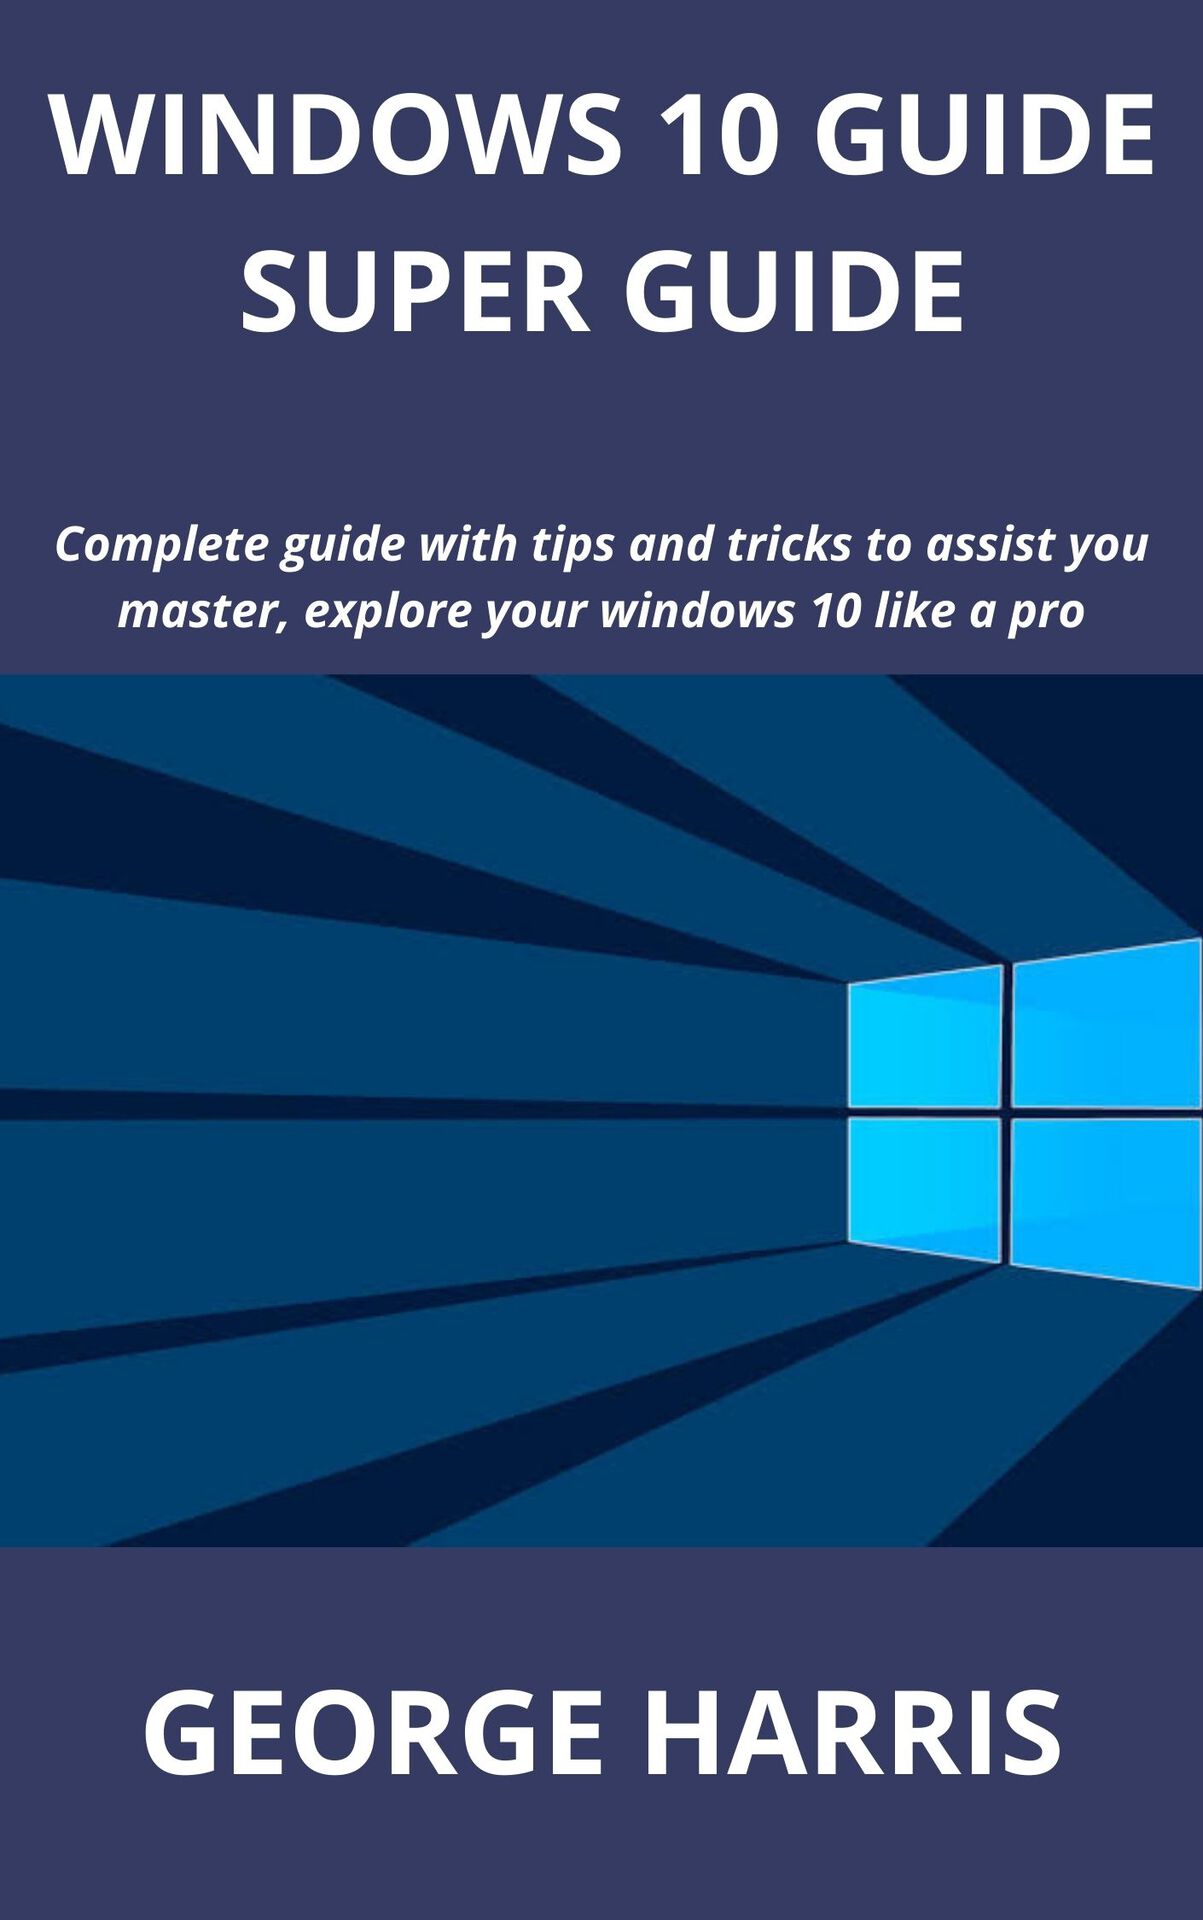 WINDOWS 10 GUIDE SUPER GUIDE: Complete guide with tips and tricks to assist you master, explore your windows 10 like a pro